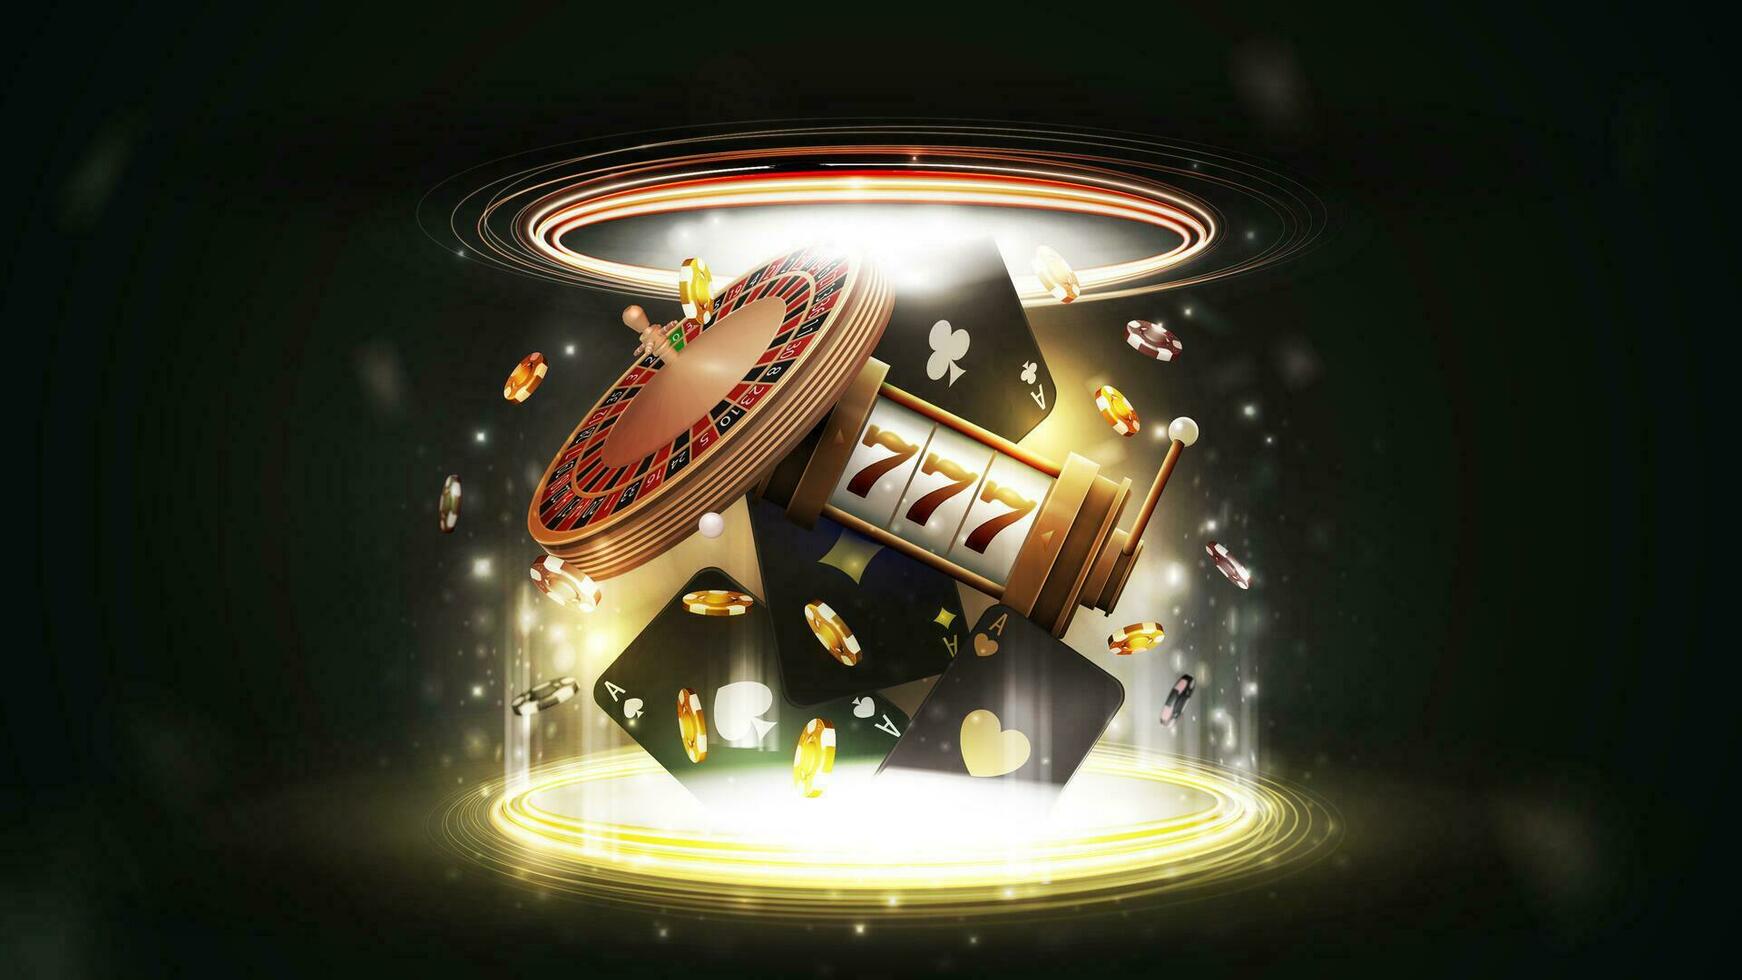 Black casino playing cards, casino roulette, slot machine and poker chips inside gold portal made of digital rings on dark background vector